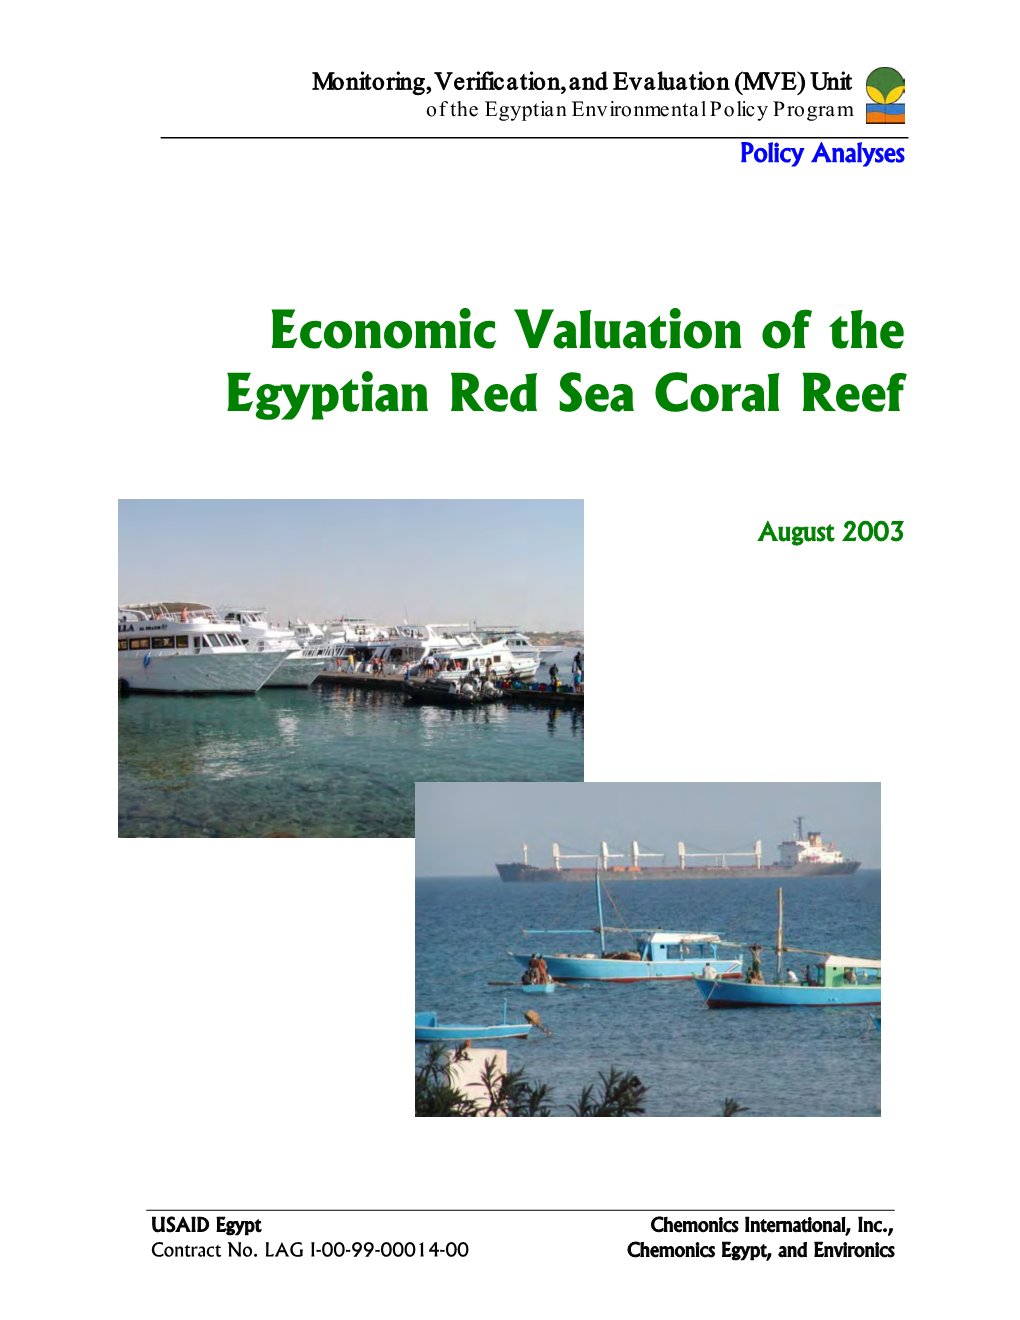 Economic Valuation of the Egyptian Red Sea Coral Reef